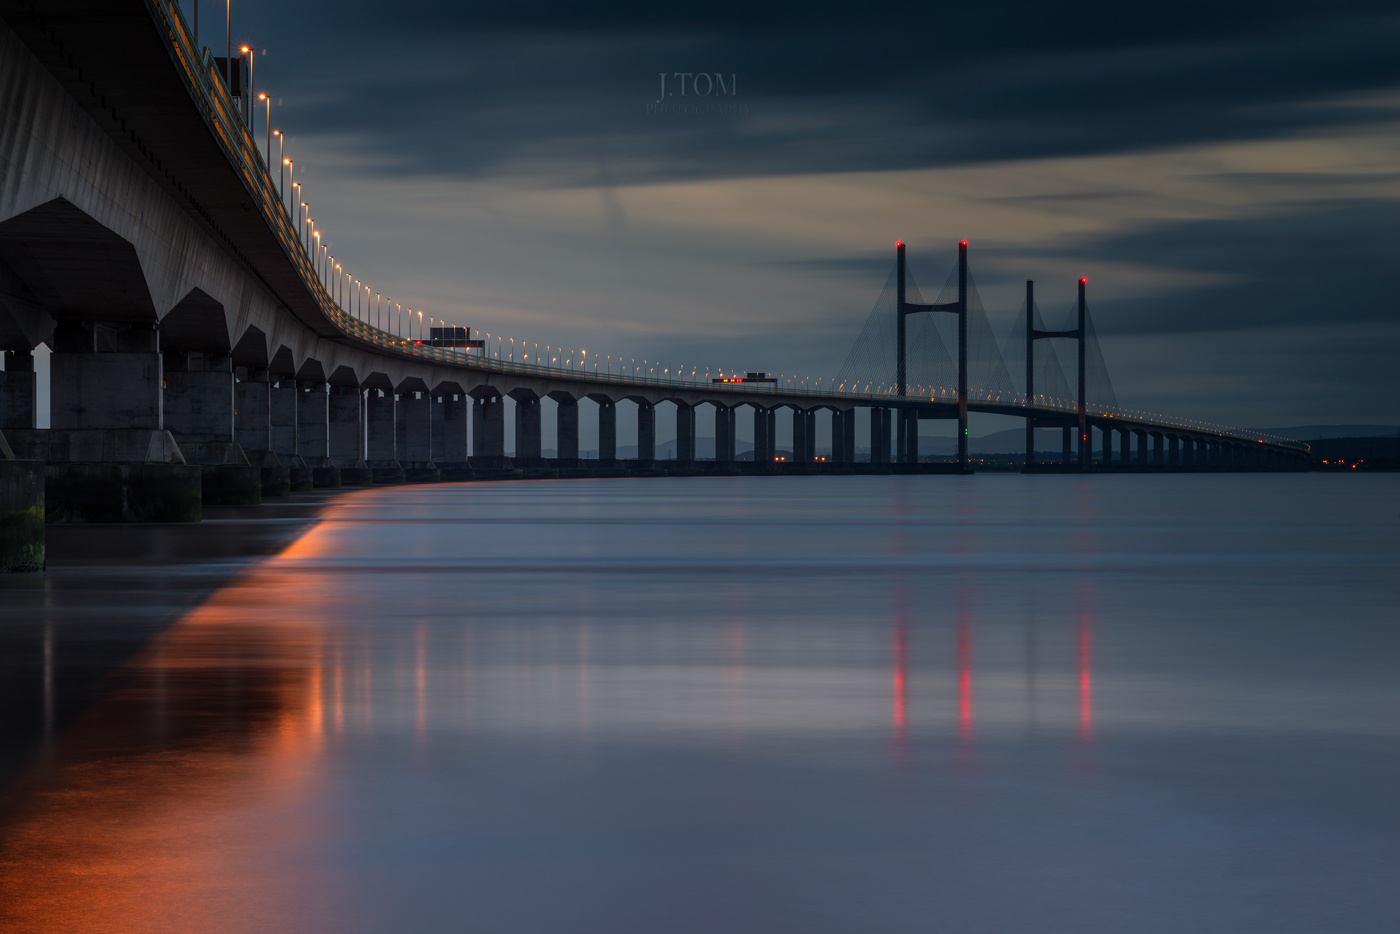 Second Severn Crossing Bridge at night. Second try ;)